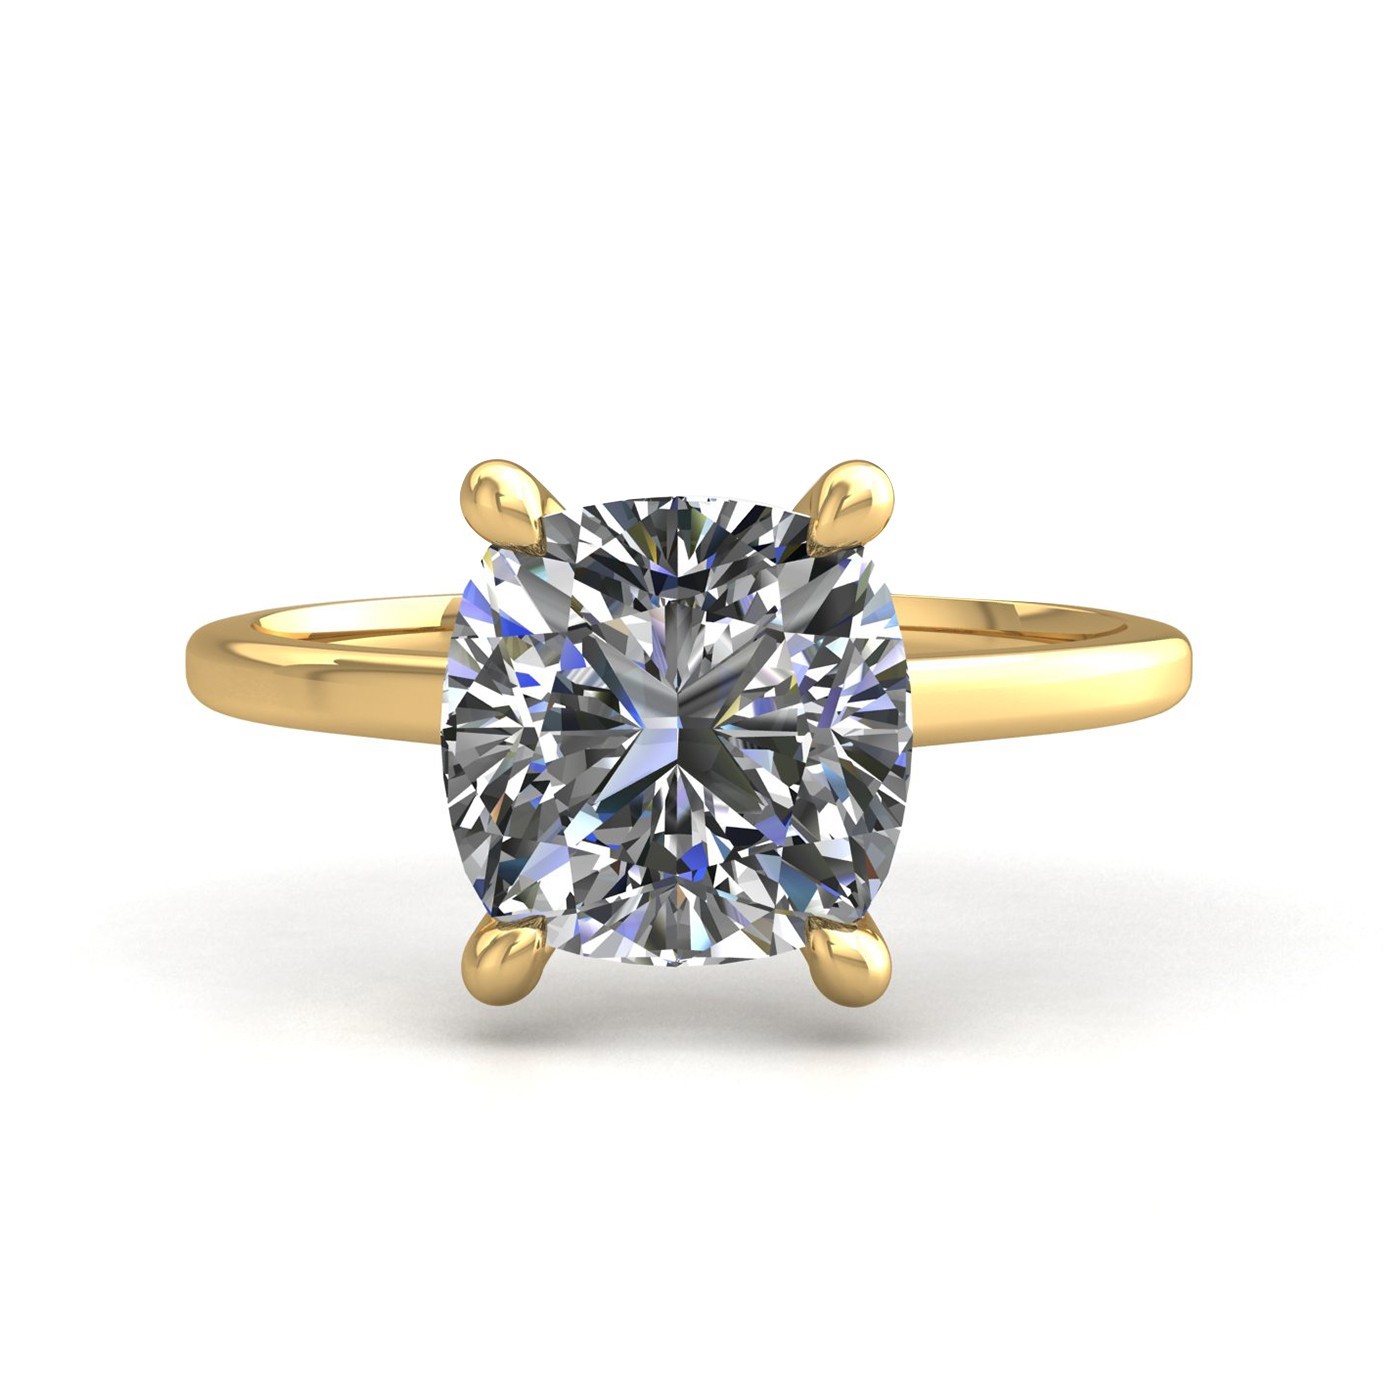 18k yellow gold  0,30 ct 4 prongs solitaire cushion cut diamond engagement ring with whisper thin band Photos & images